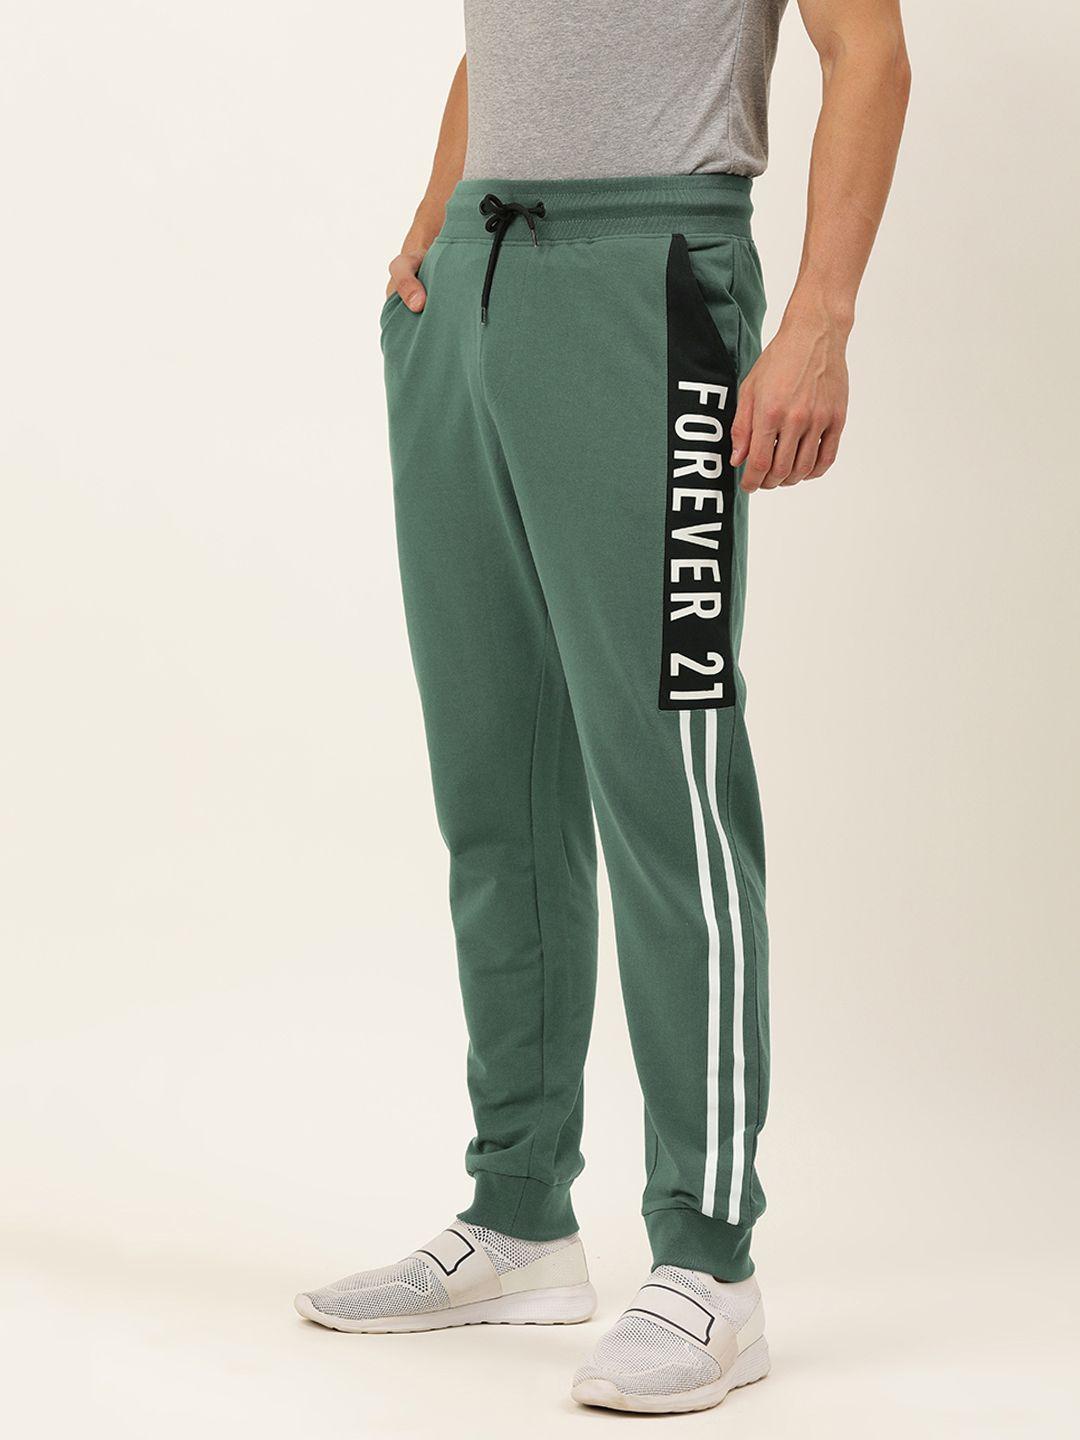 forever-21-blue-brand-logo-printed-active-sport-joggers-track-pant-with-side-stripes